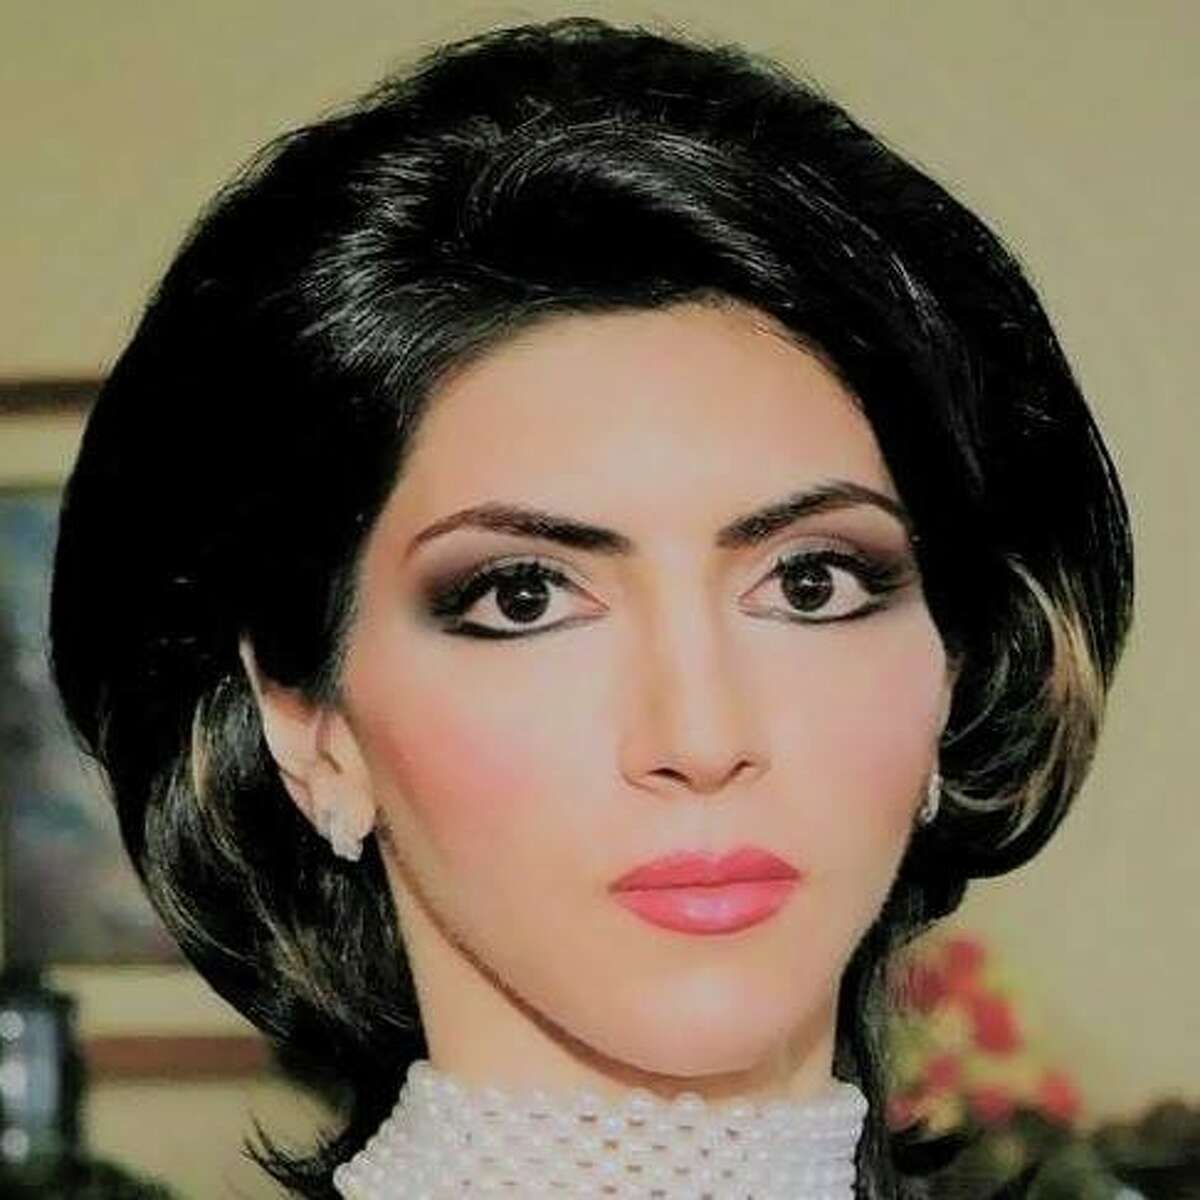 Law enforcement sources have confirmed Nasim Aghdam of Southern California as the woman suspected of opening fire at YouTube’s headquarters in San Bruno Tuesday, April 3, 2018.